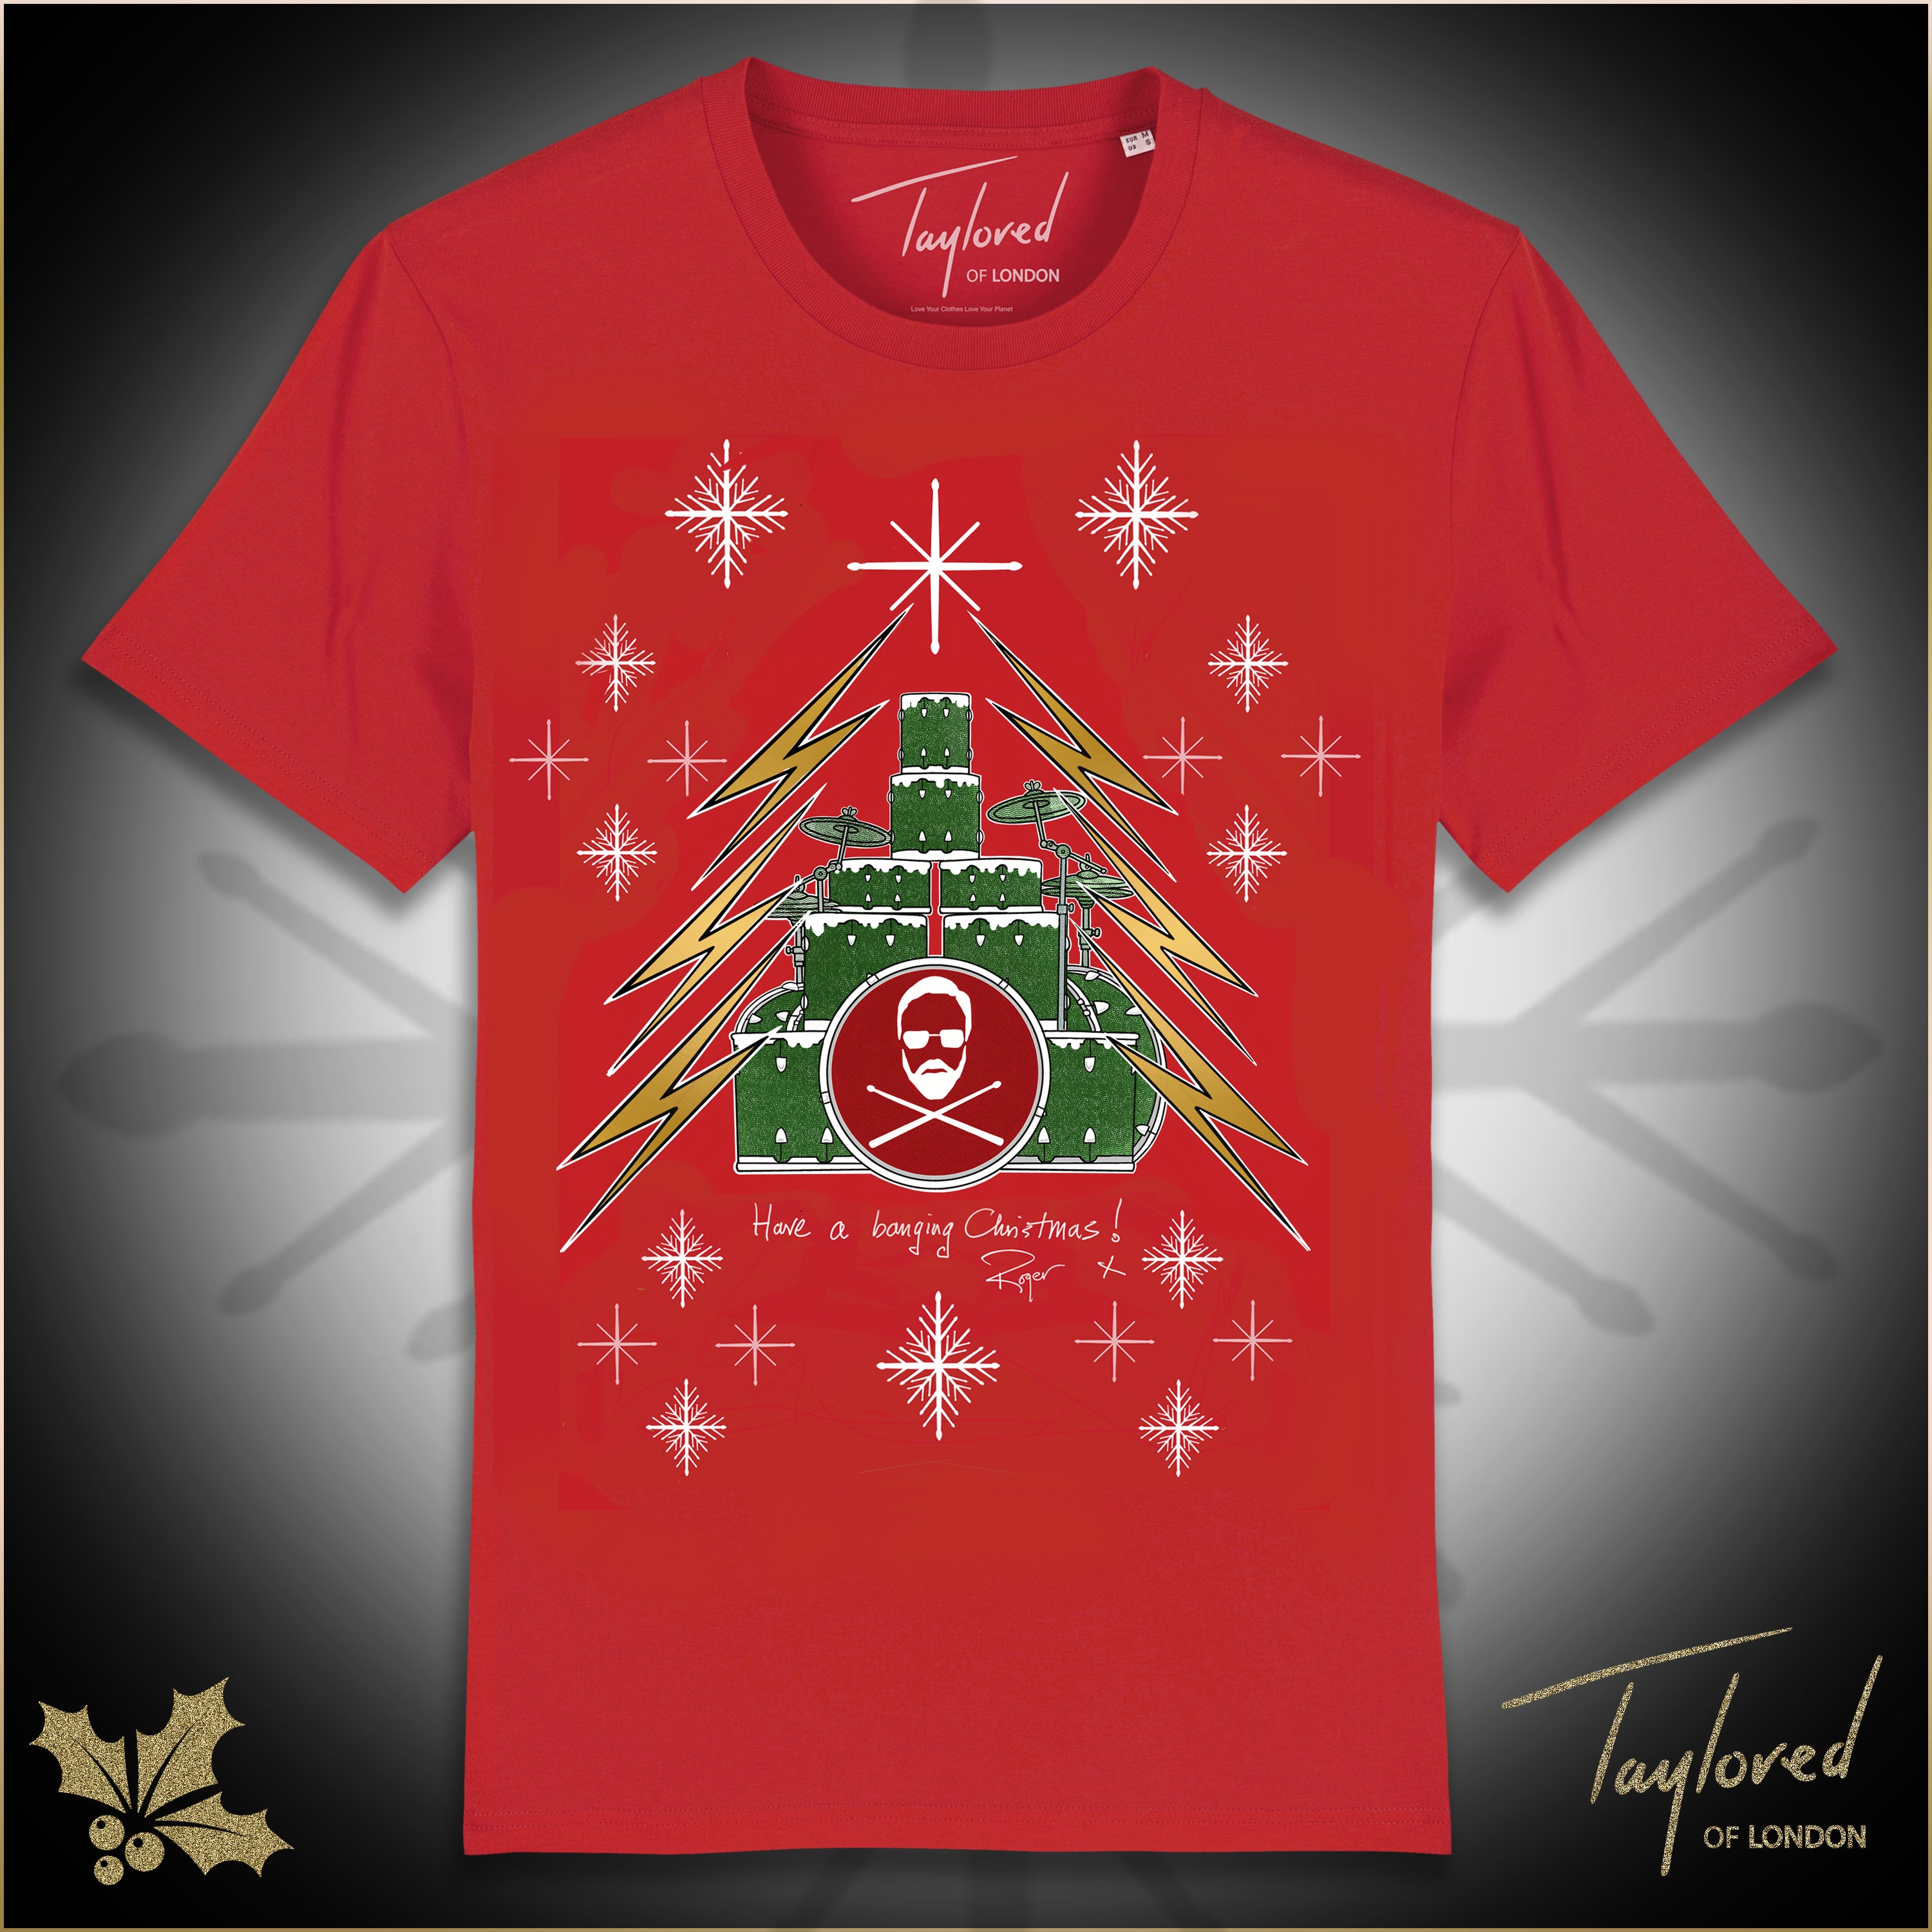 Roger Taylor - Taylored 'Have A Banging Christmas!' Tee